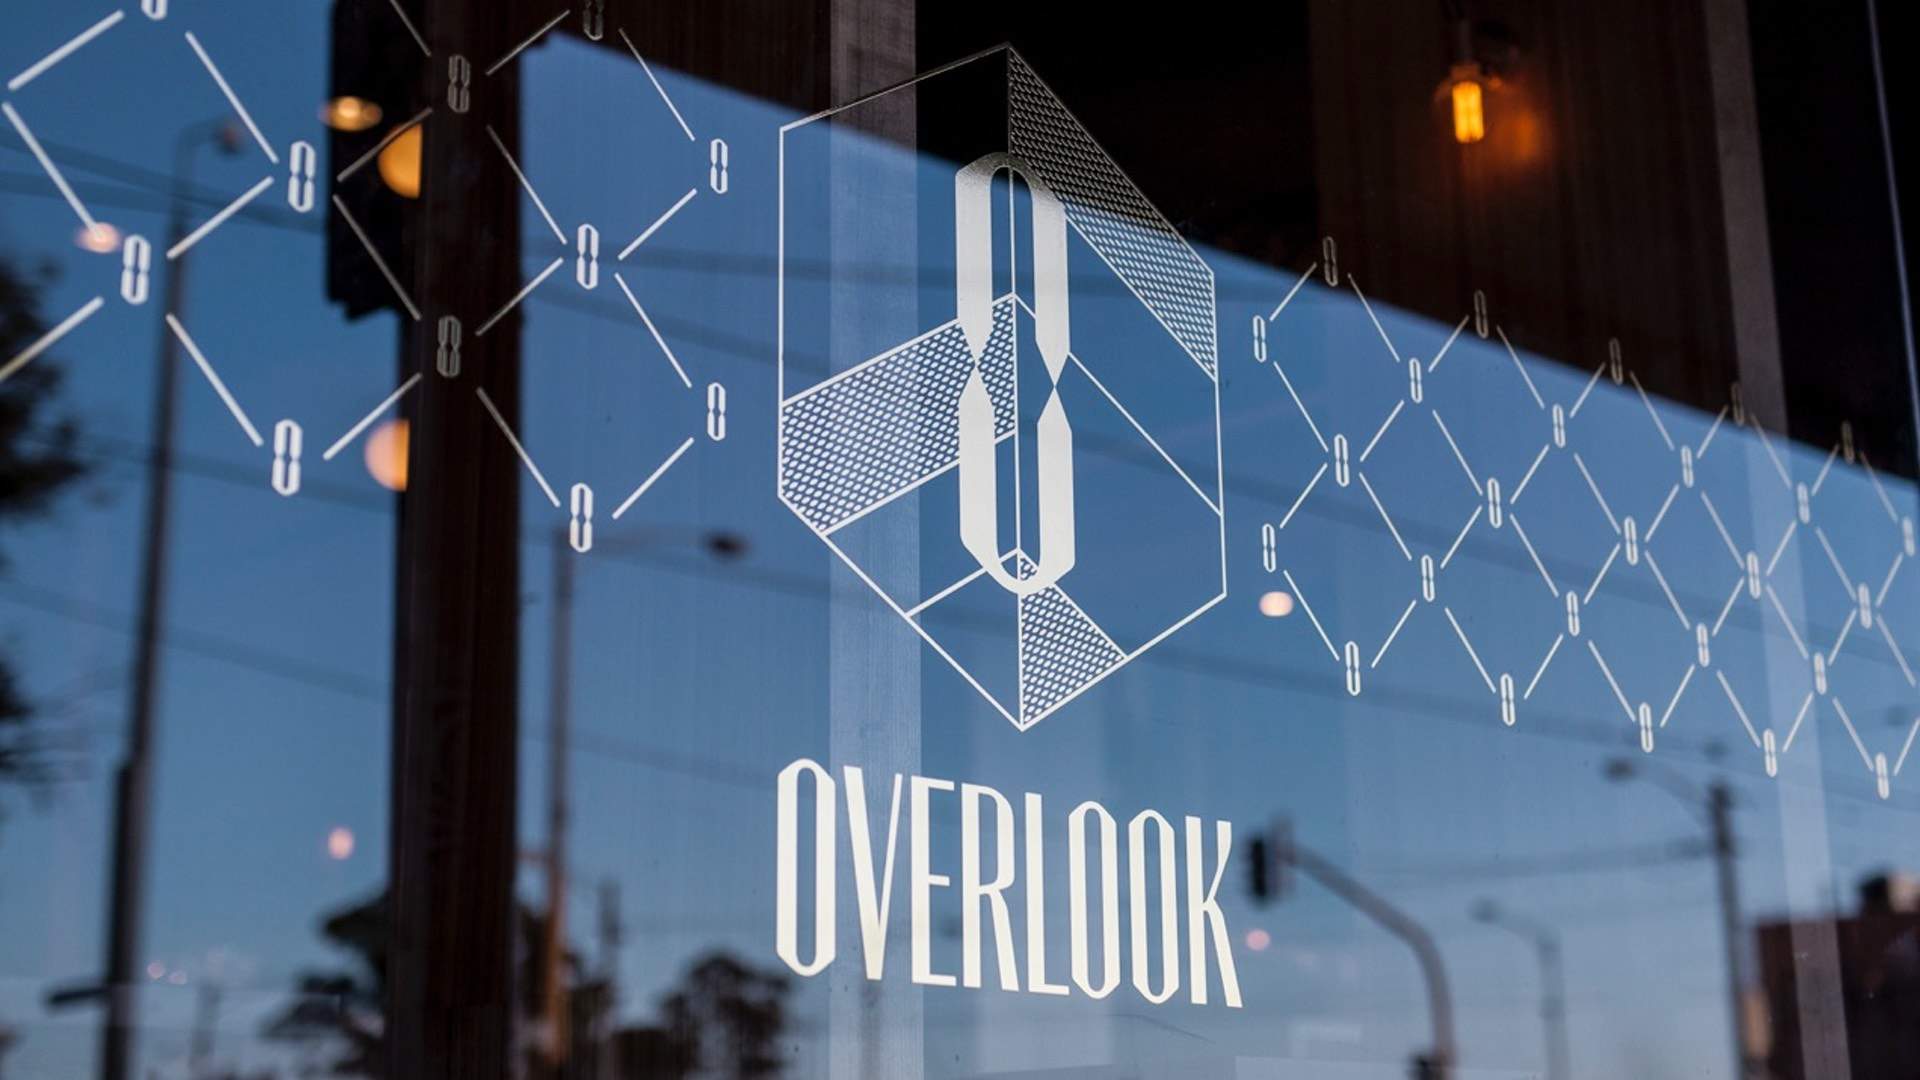 Overlook Is The Astor Theatre's New All-Day Cafe and Bar Inspired by The Shining